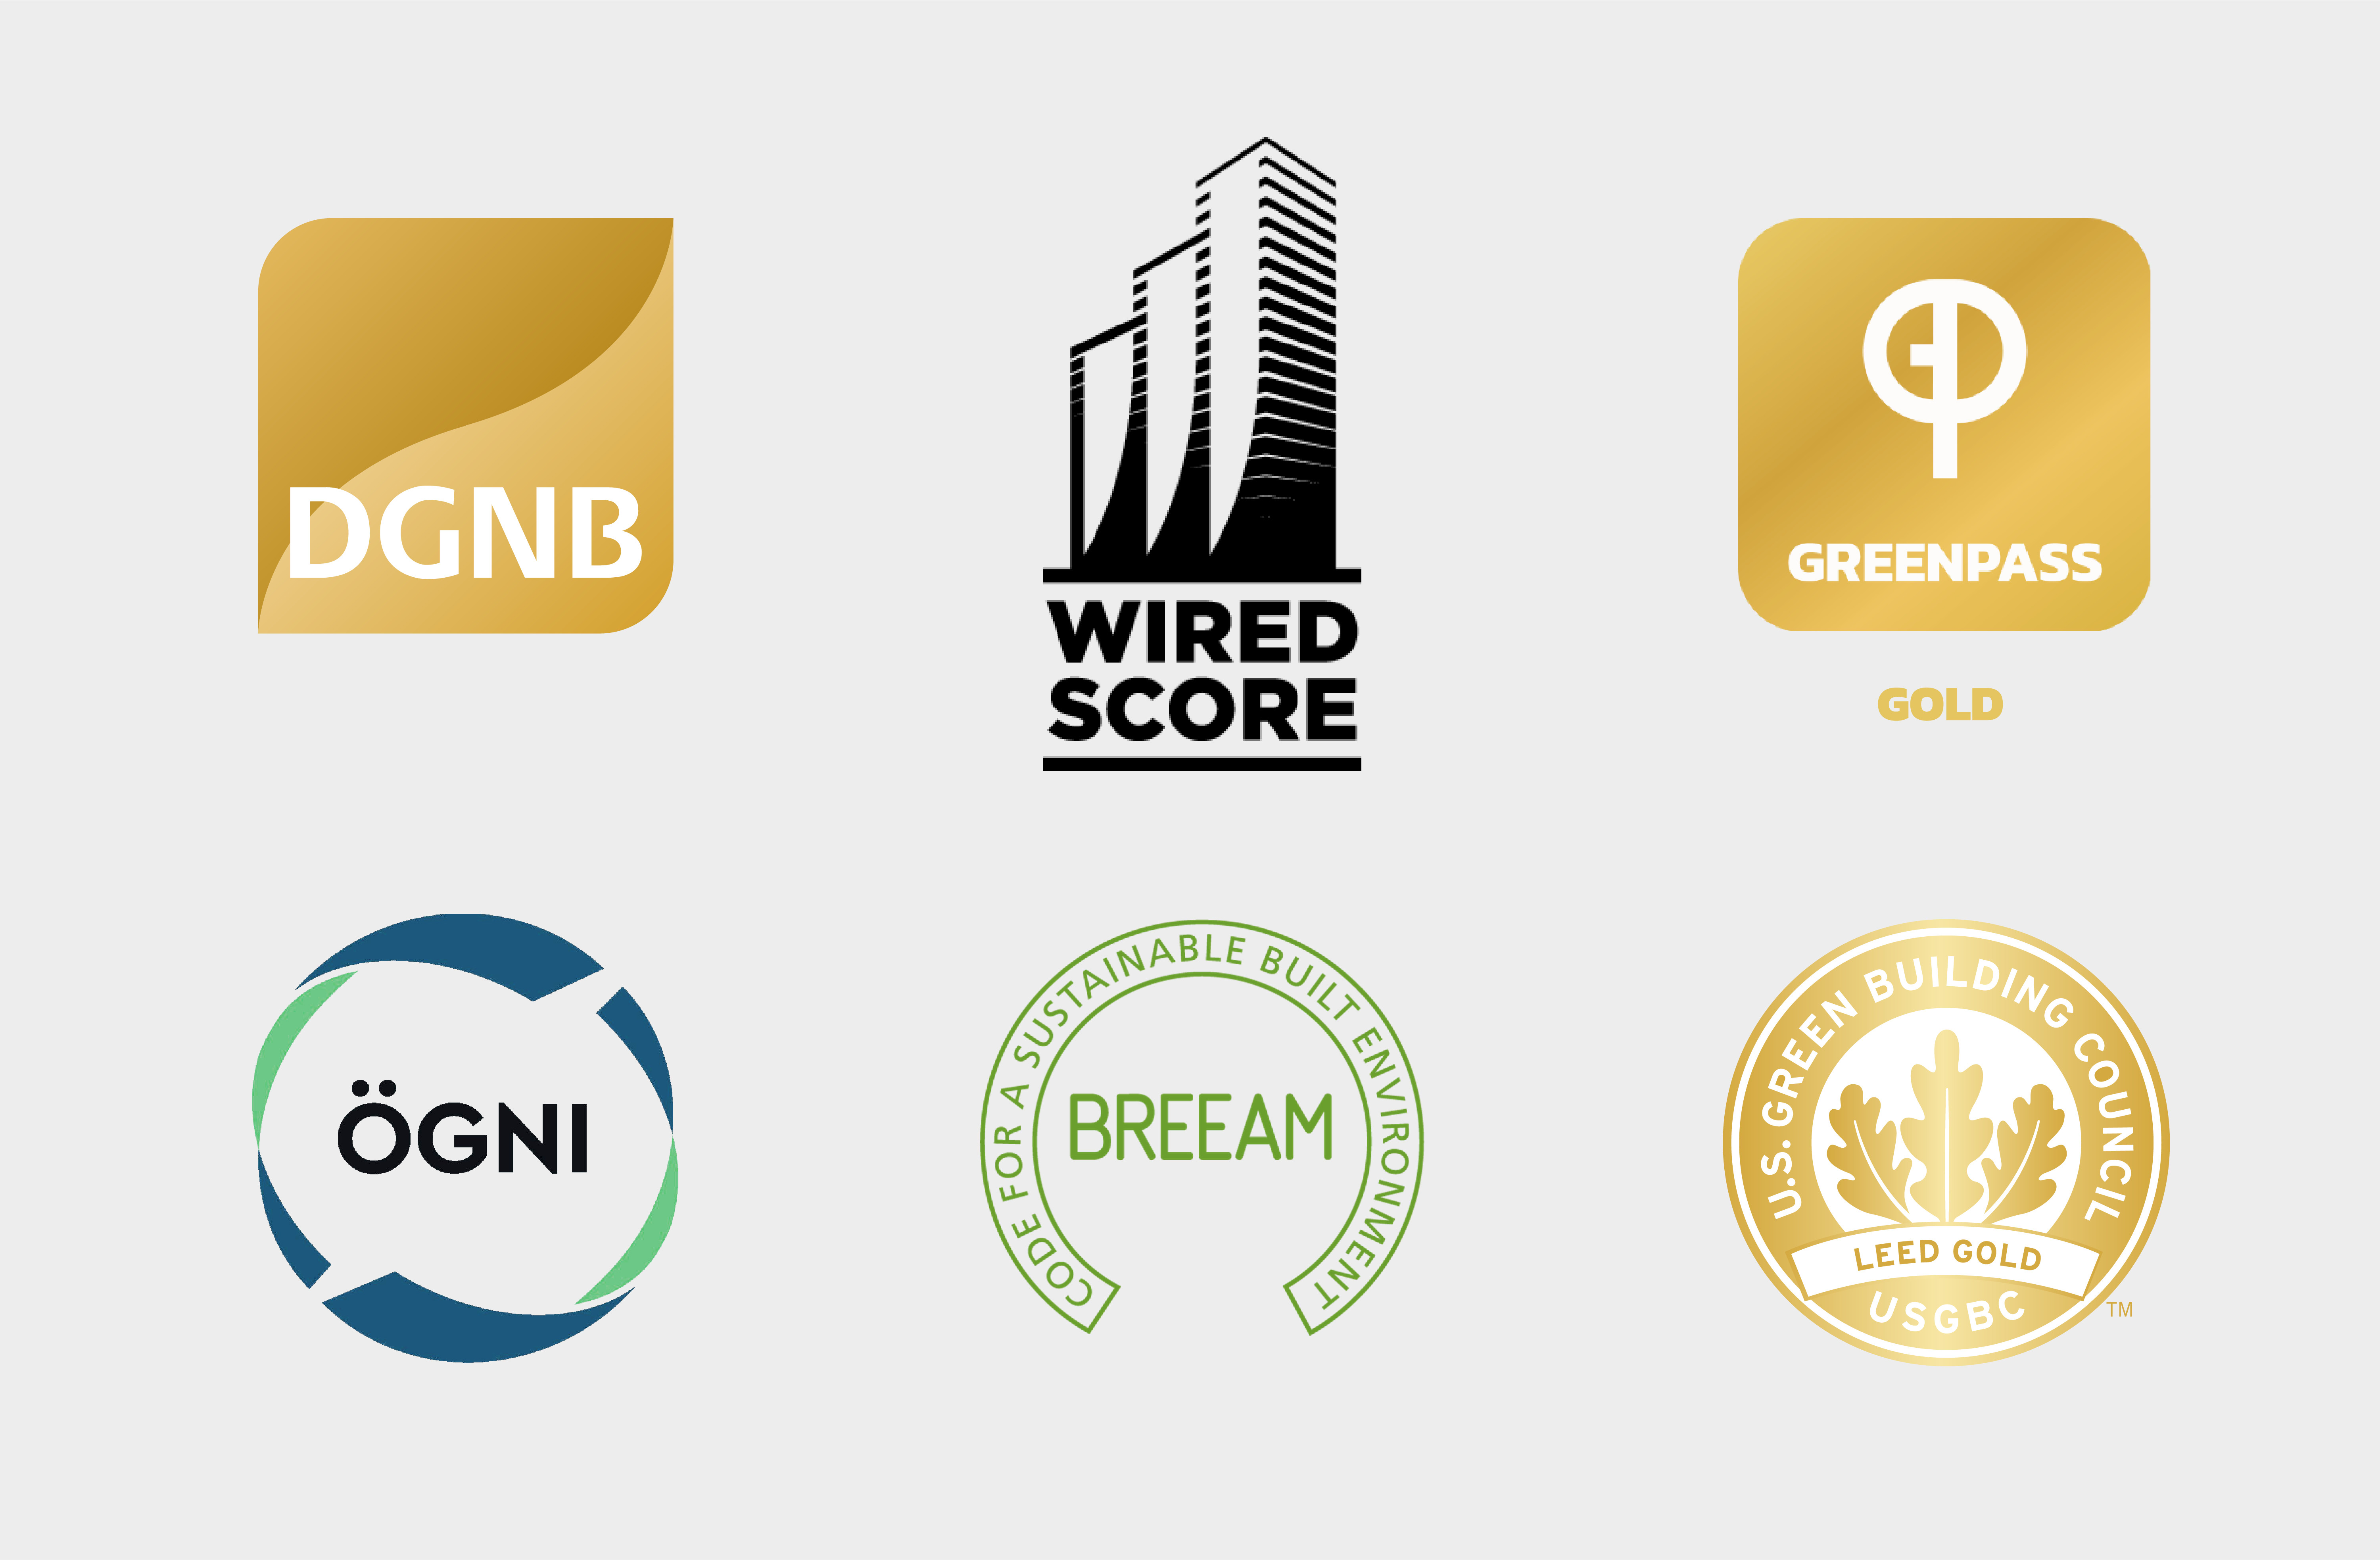 Image of the various quality seals of industry such as DGNB, ÖGNI, Breeam